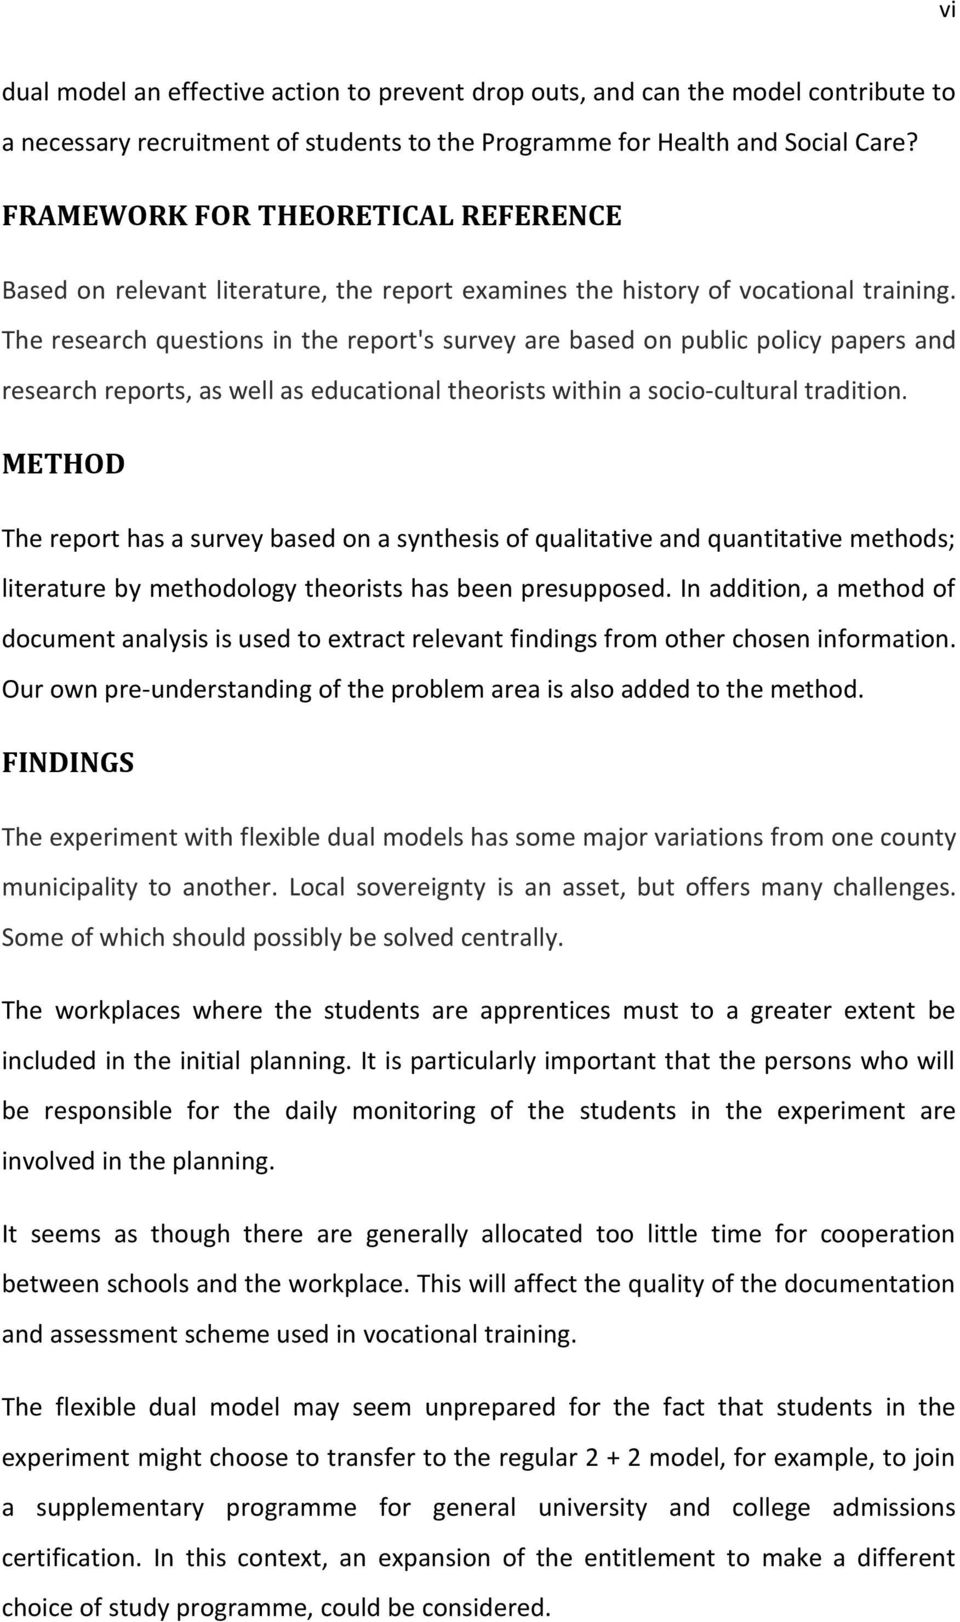 The research questions in the report's survey are based on public policy papers and research reports, as well as educational theorists within a socio-cultural tradition.